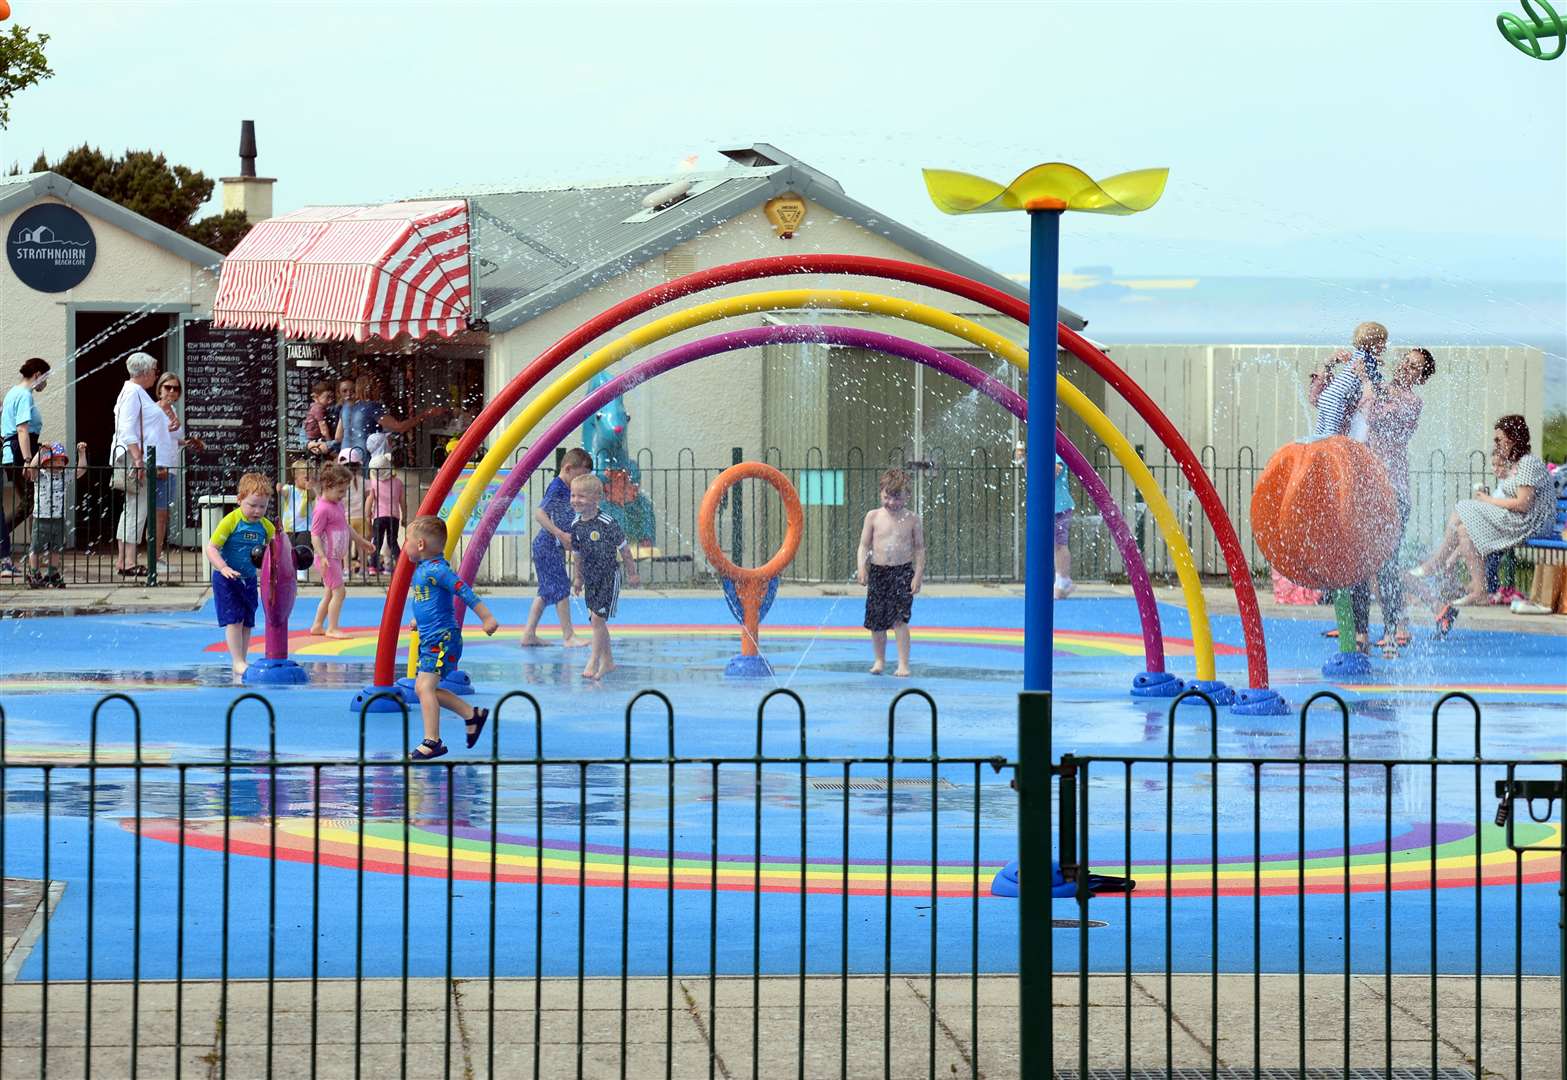 The splash pad has been a popular addition at Nairn Links. Picture: Gary Anthony